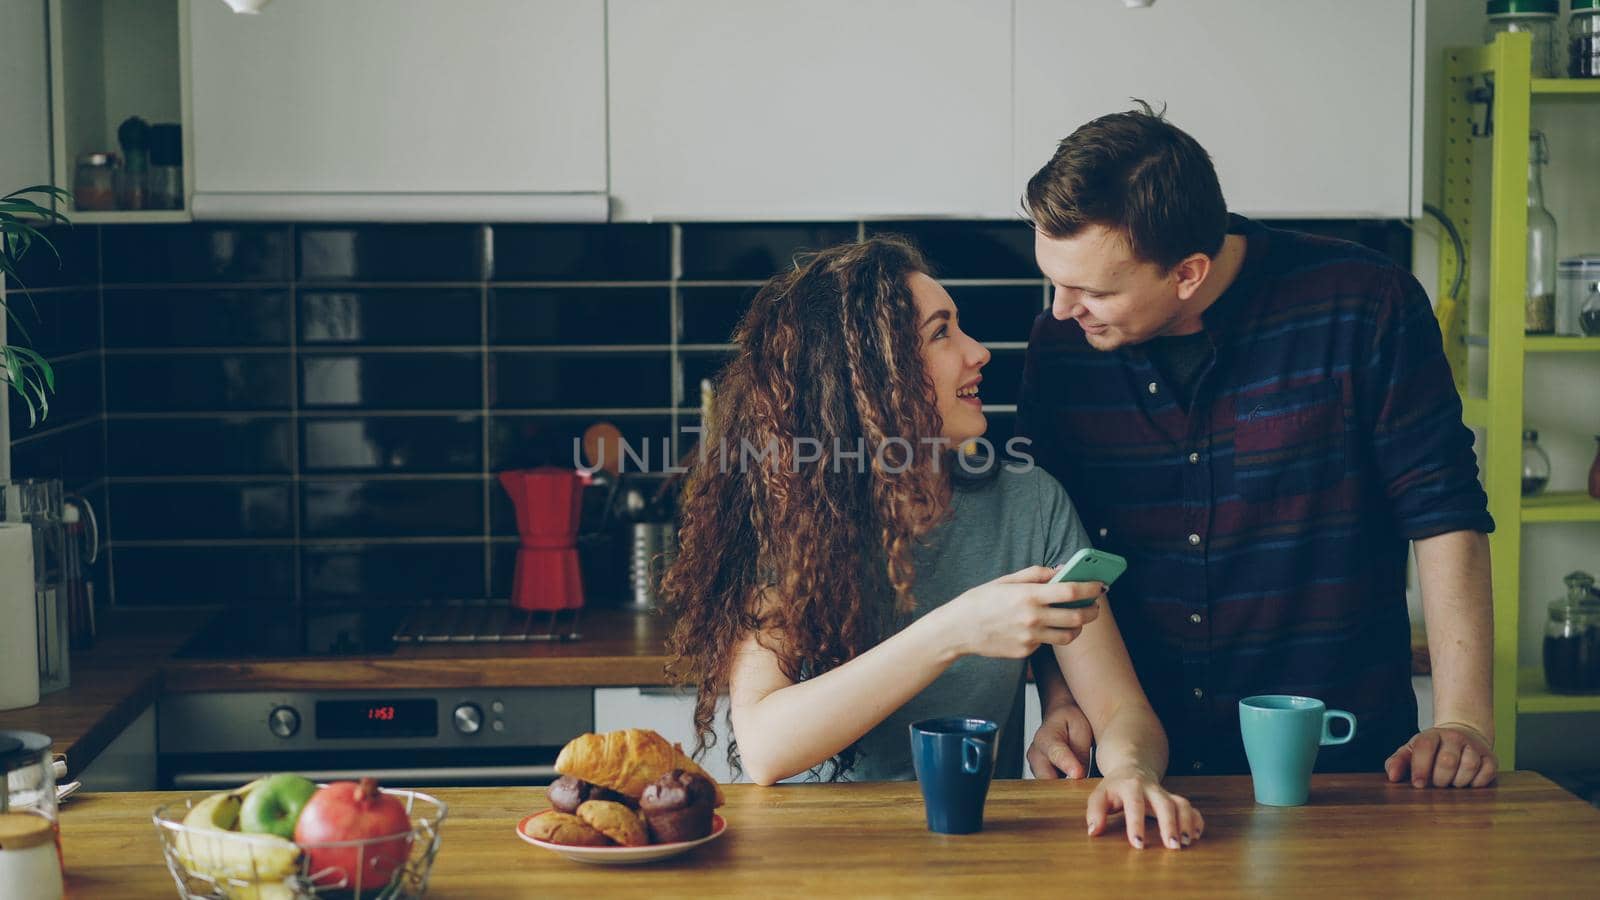 young attractive curly happy caucasian woman is sitting in kitchen texting someone via smartphone, her husband comes and she shows something funny in phone by silverkblack